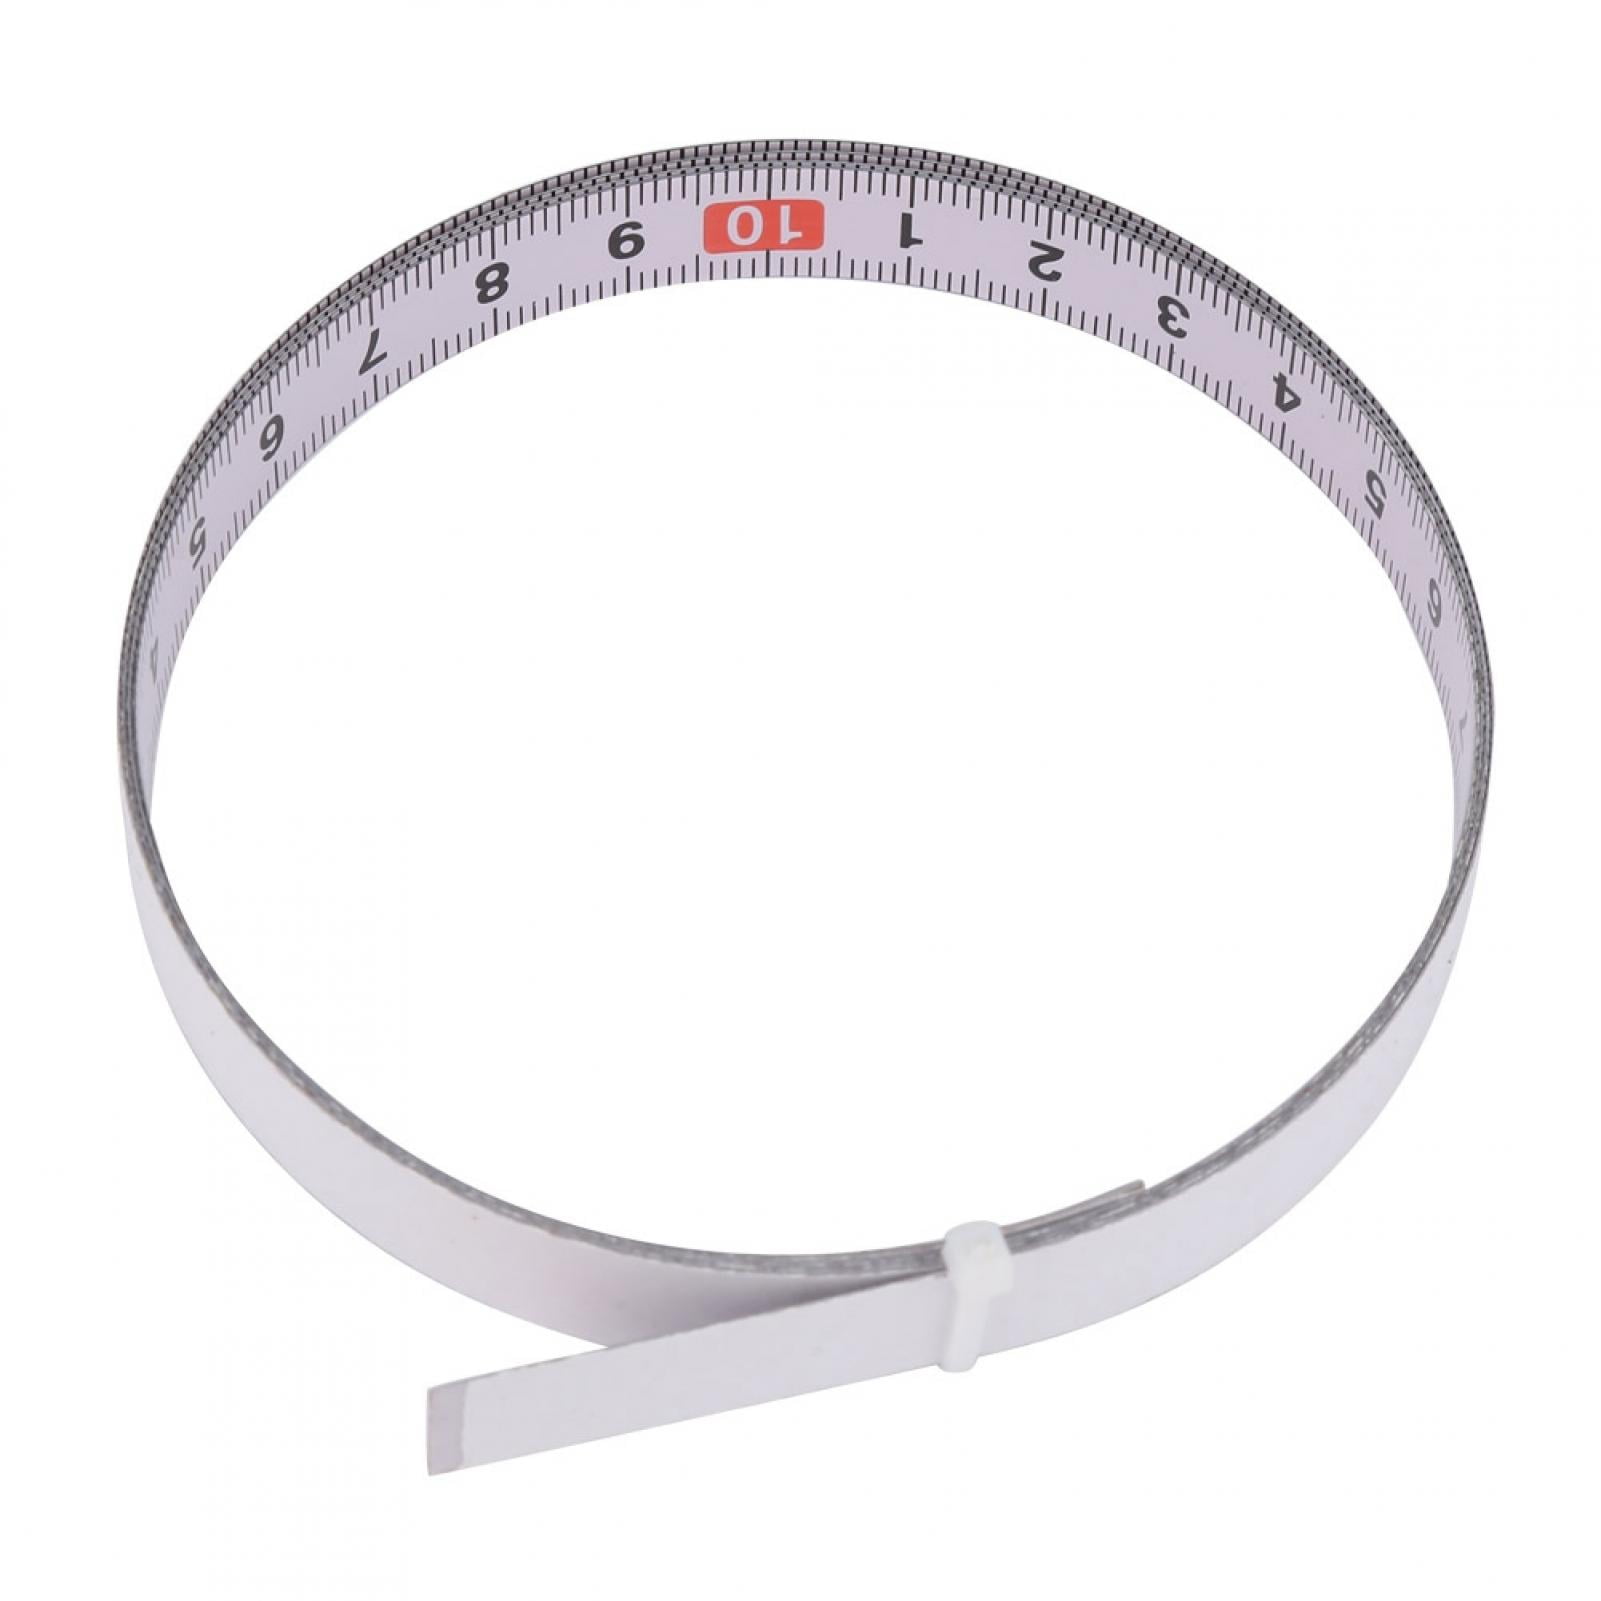 High Accuracy Durable for Measuring Marking Out Straight Ruler Stainless Steel 0-110cm Measurement Range Woodworking Gauge